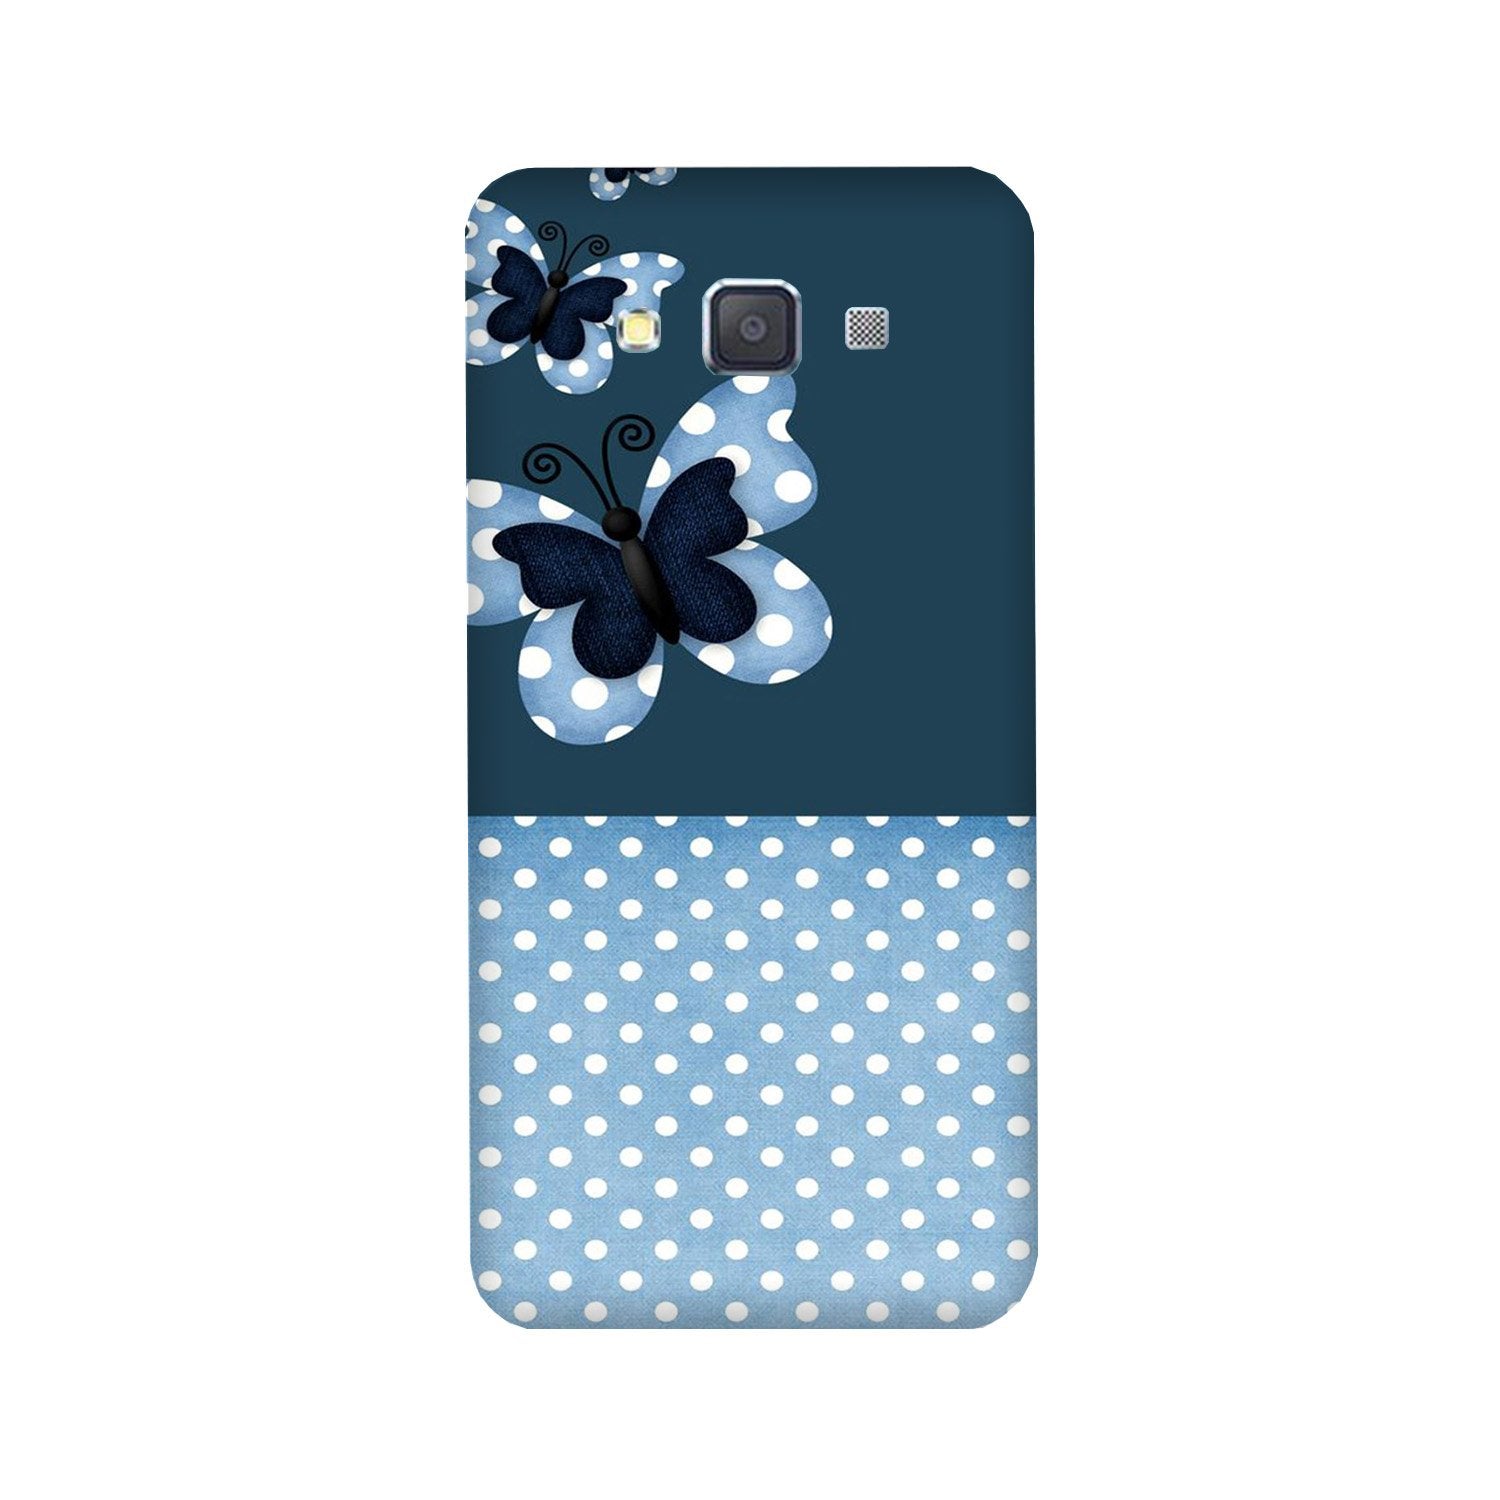 White dots Butterfly Case for Galaxy Grand Prime